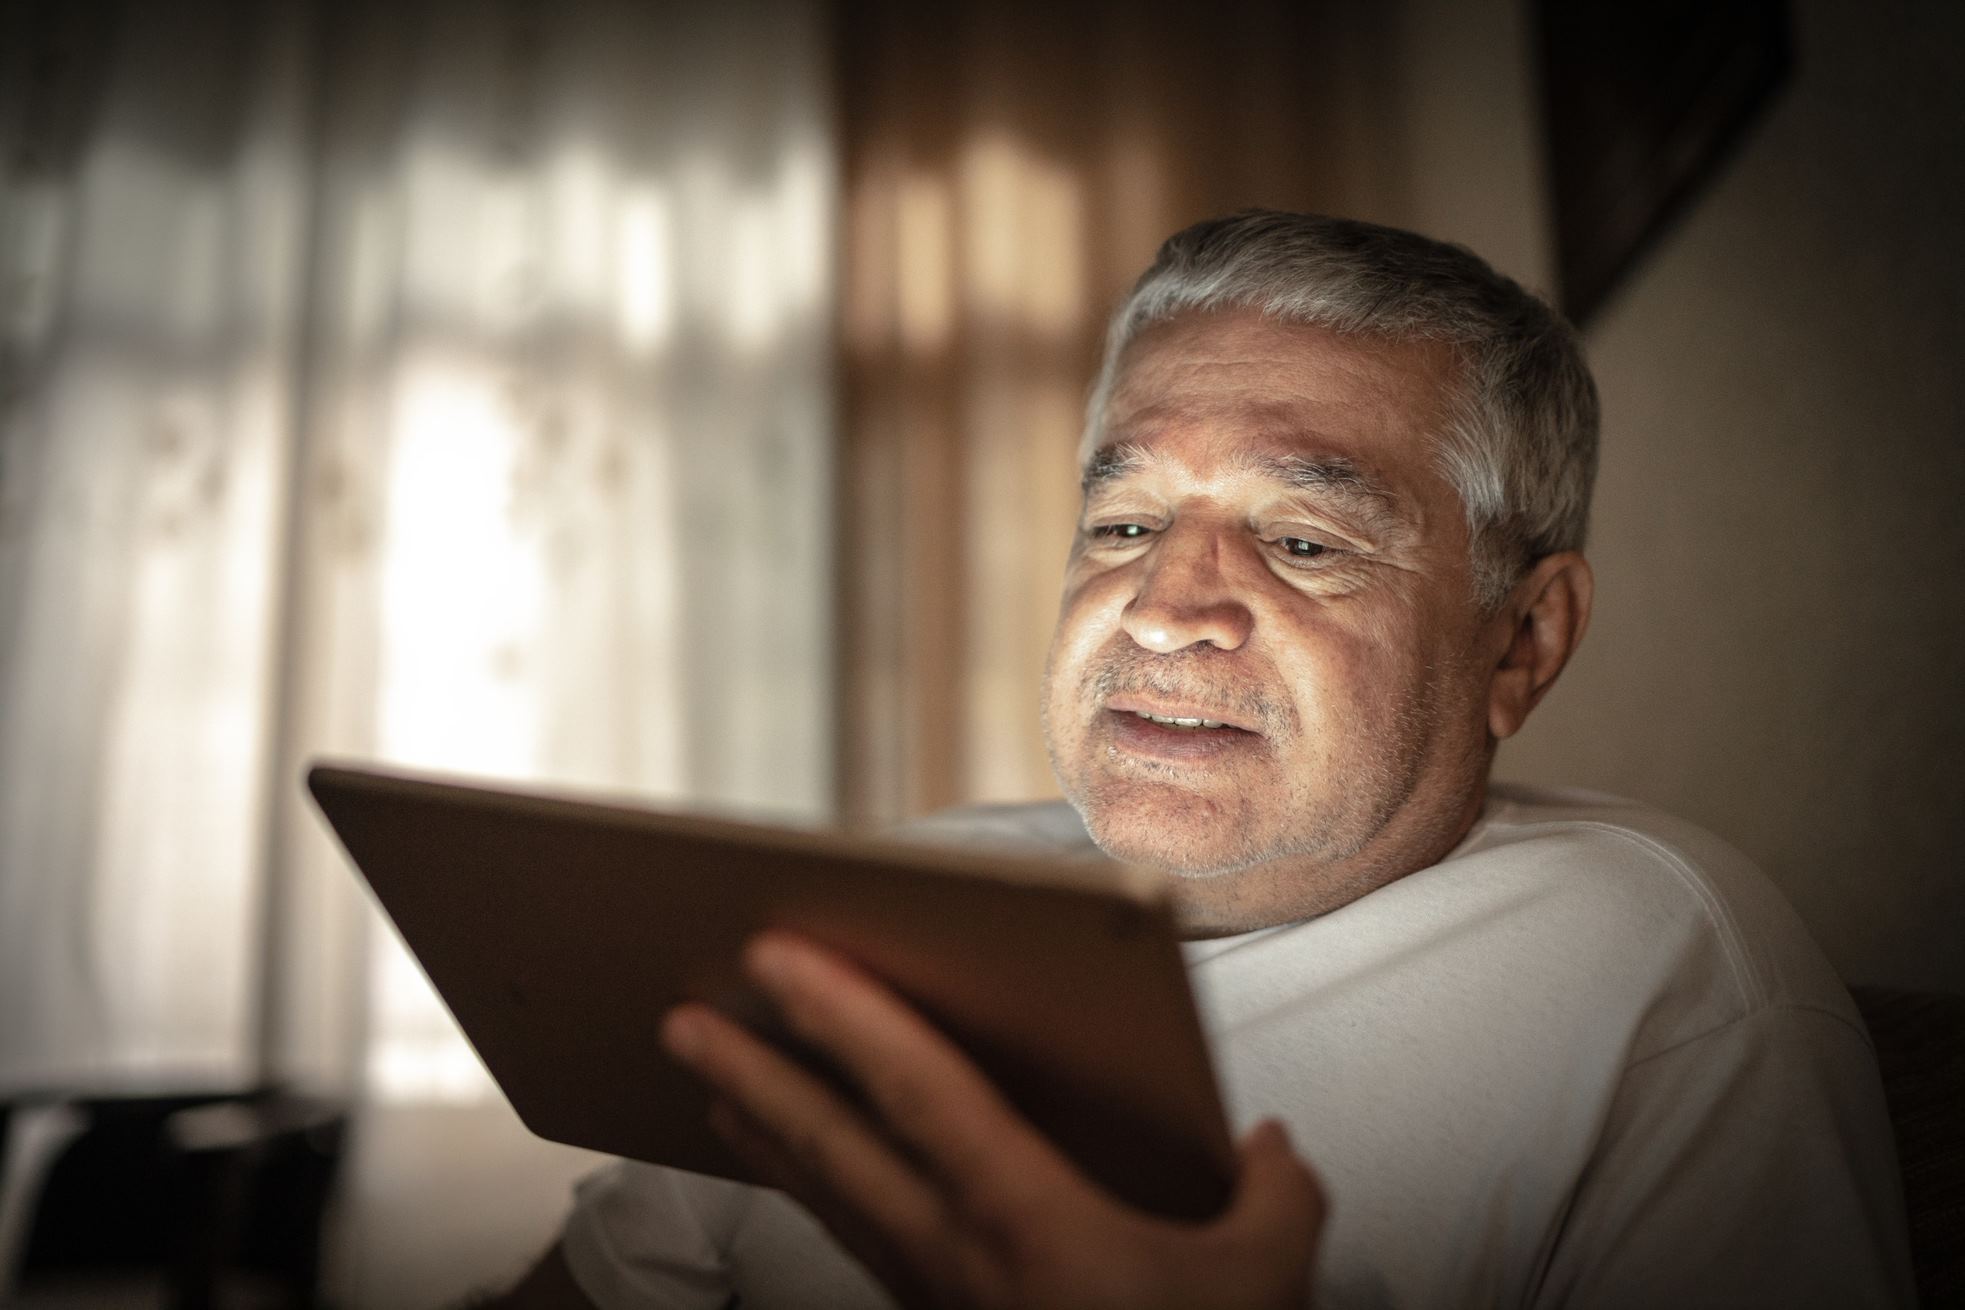 Senior using a tablet device